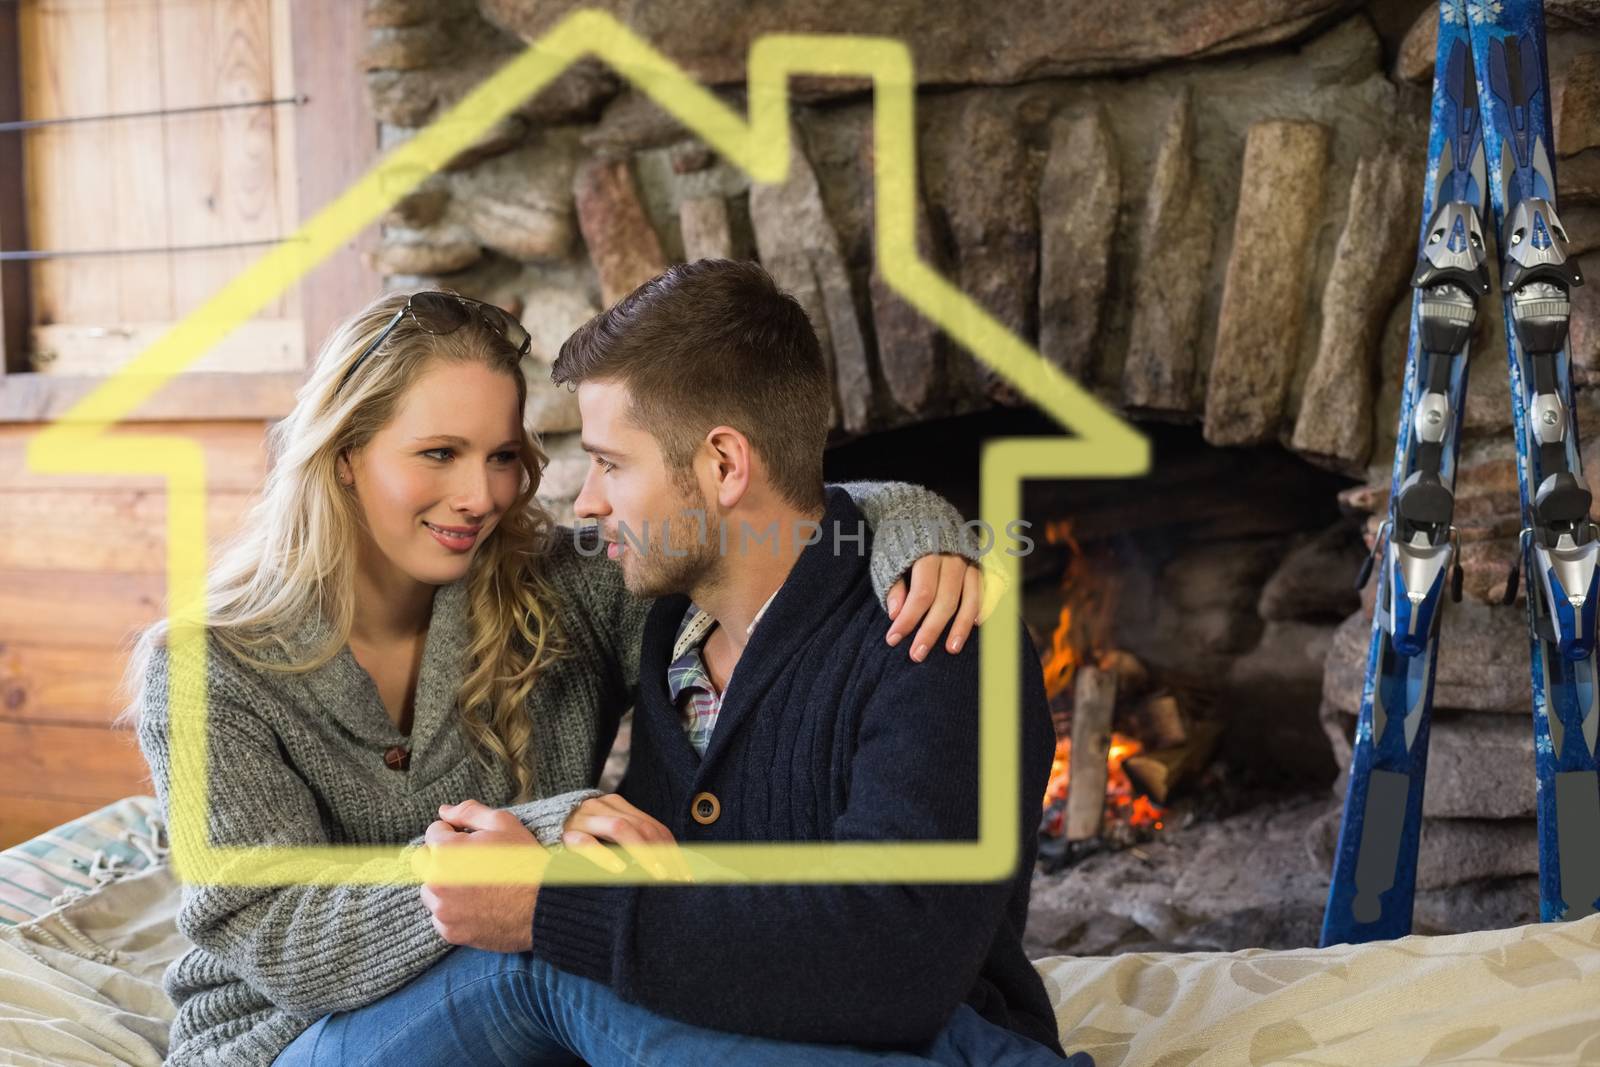 Romantic couple in front of lit fireplace against house outline